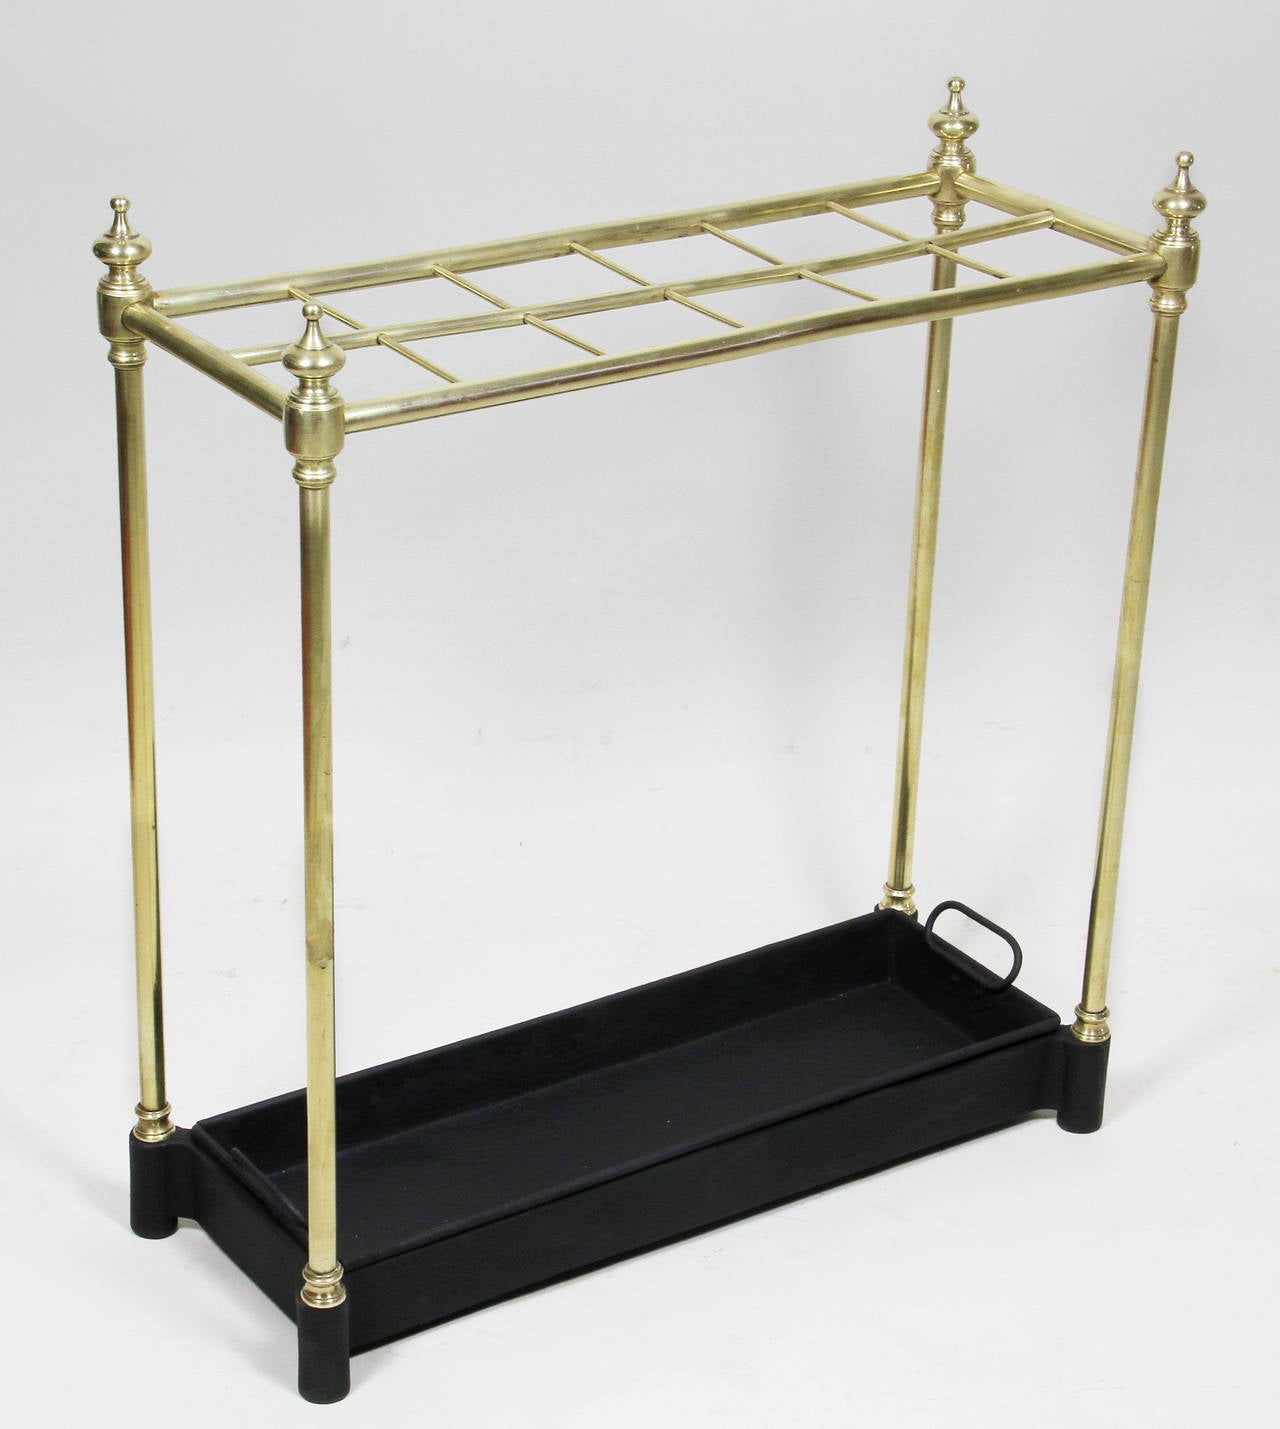 Rectangular with turned finials and turned legs , metal pan.